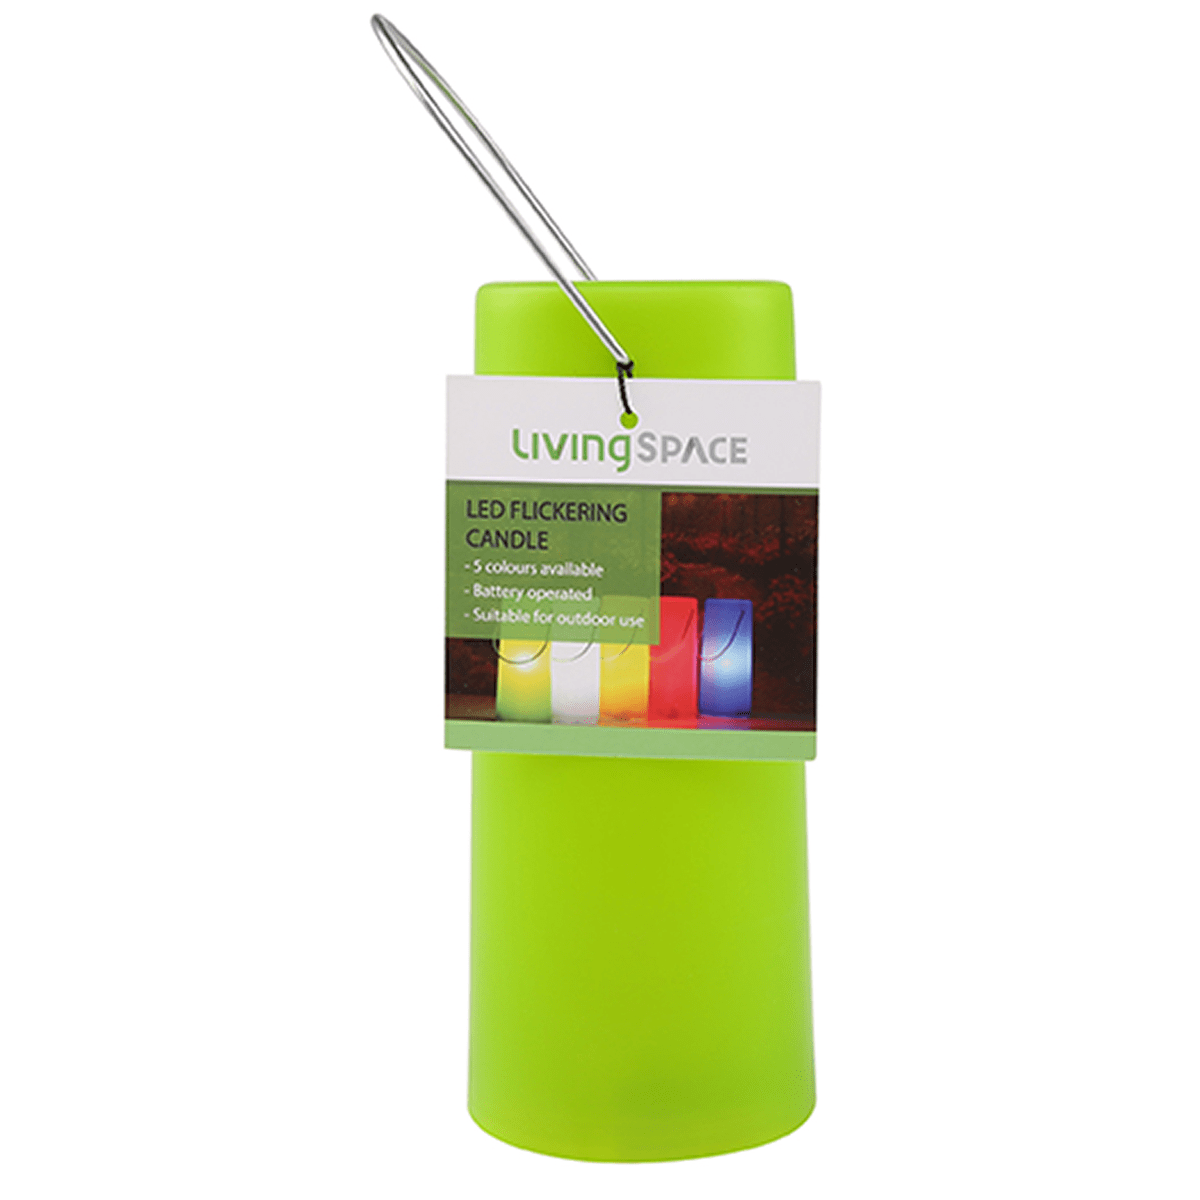 Living Space LED Flickering Candle Green